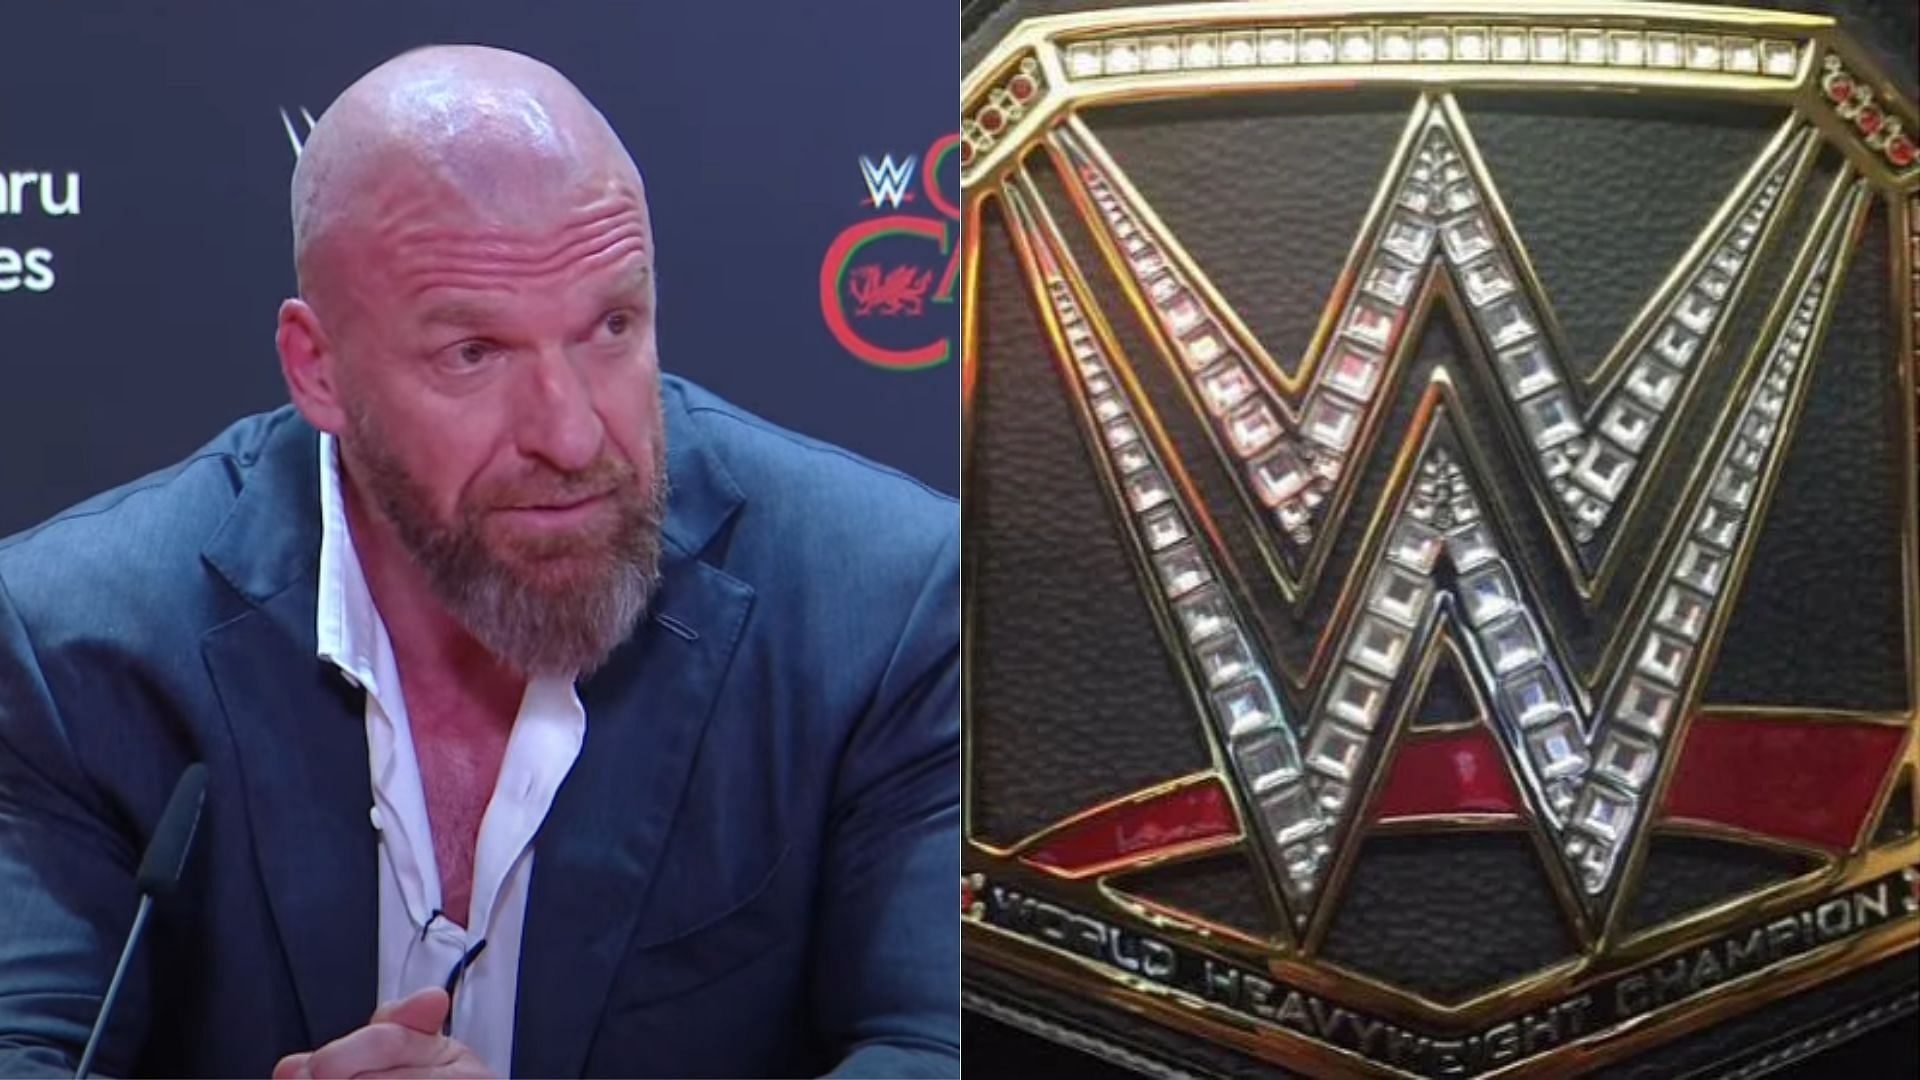 WWE head of creative and talent relations Triple H